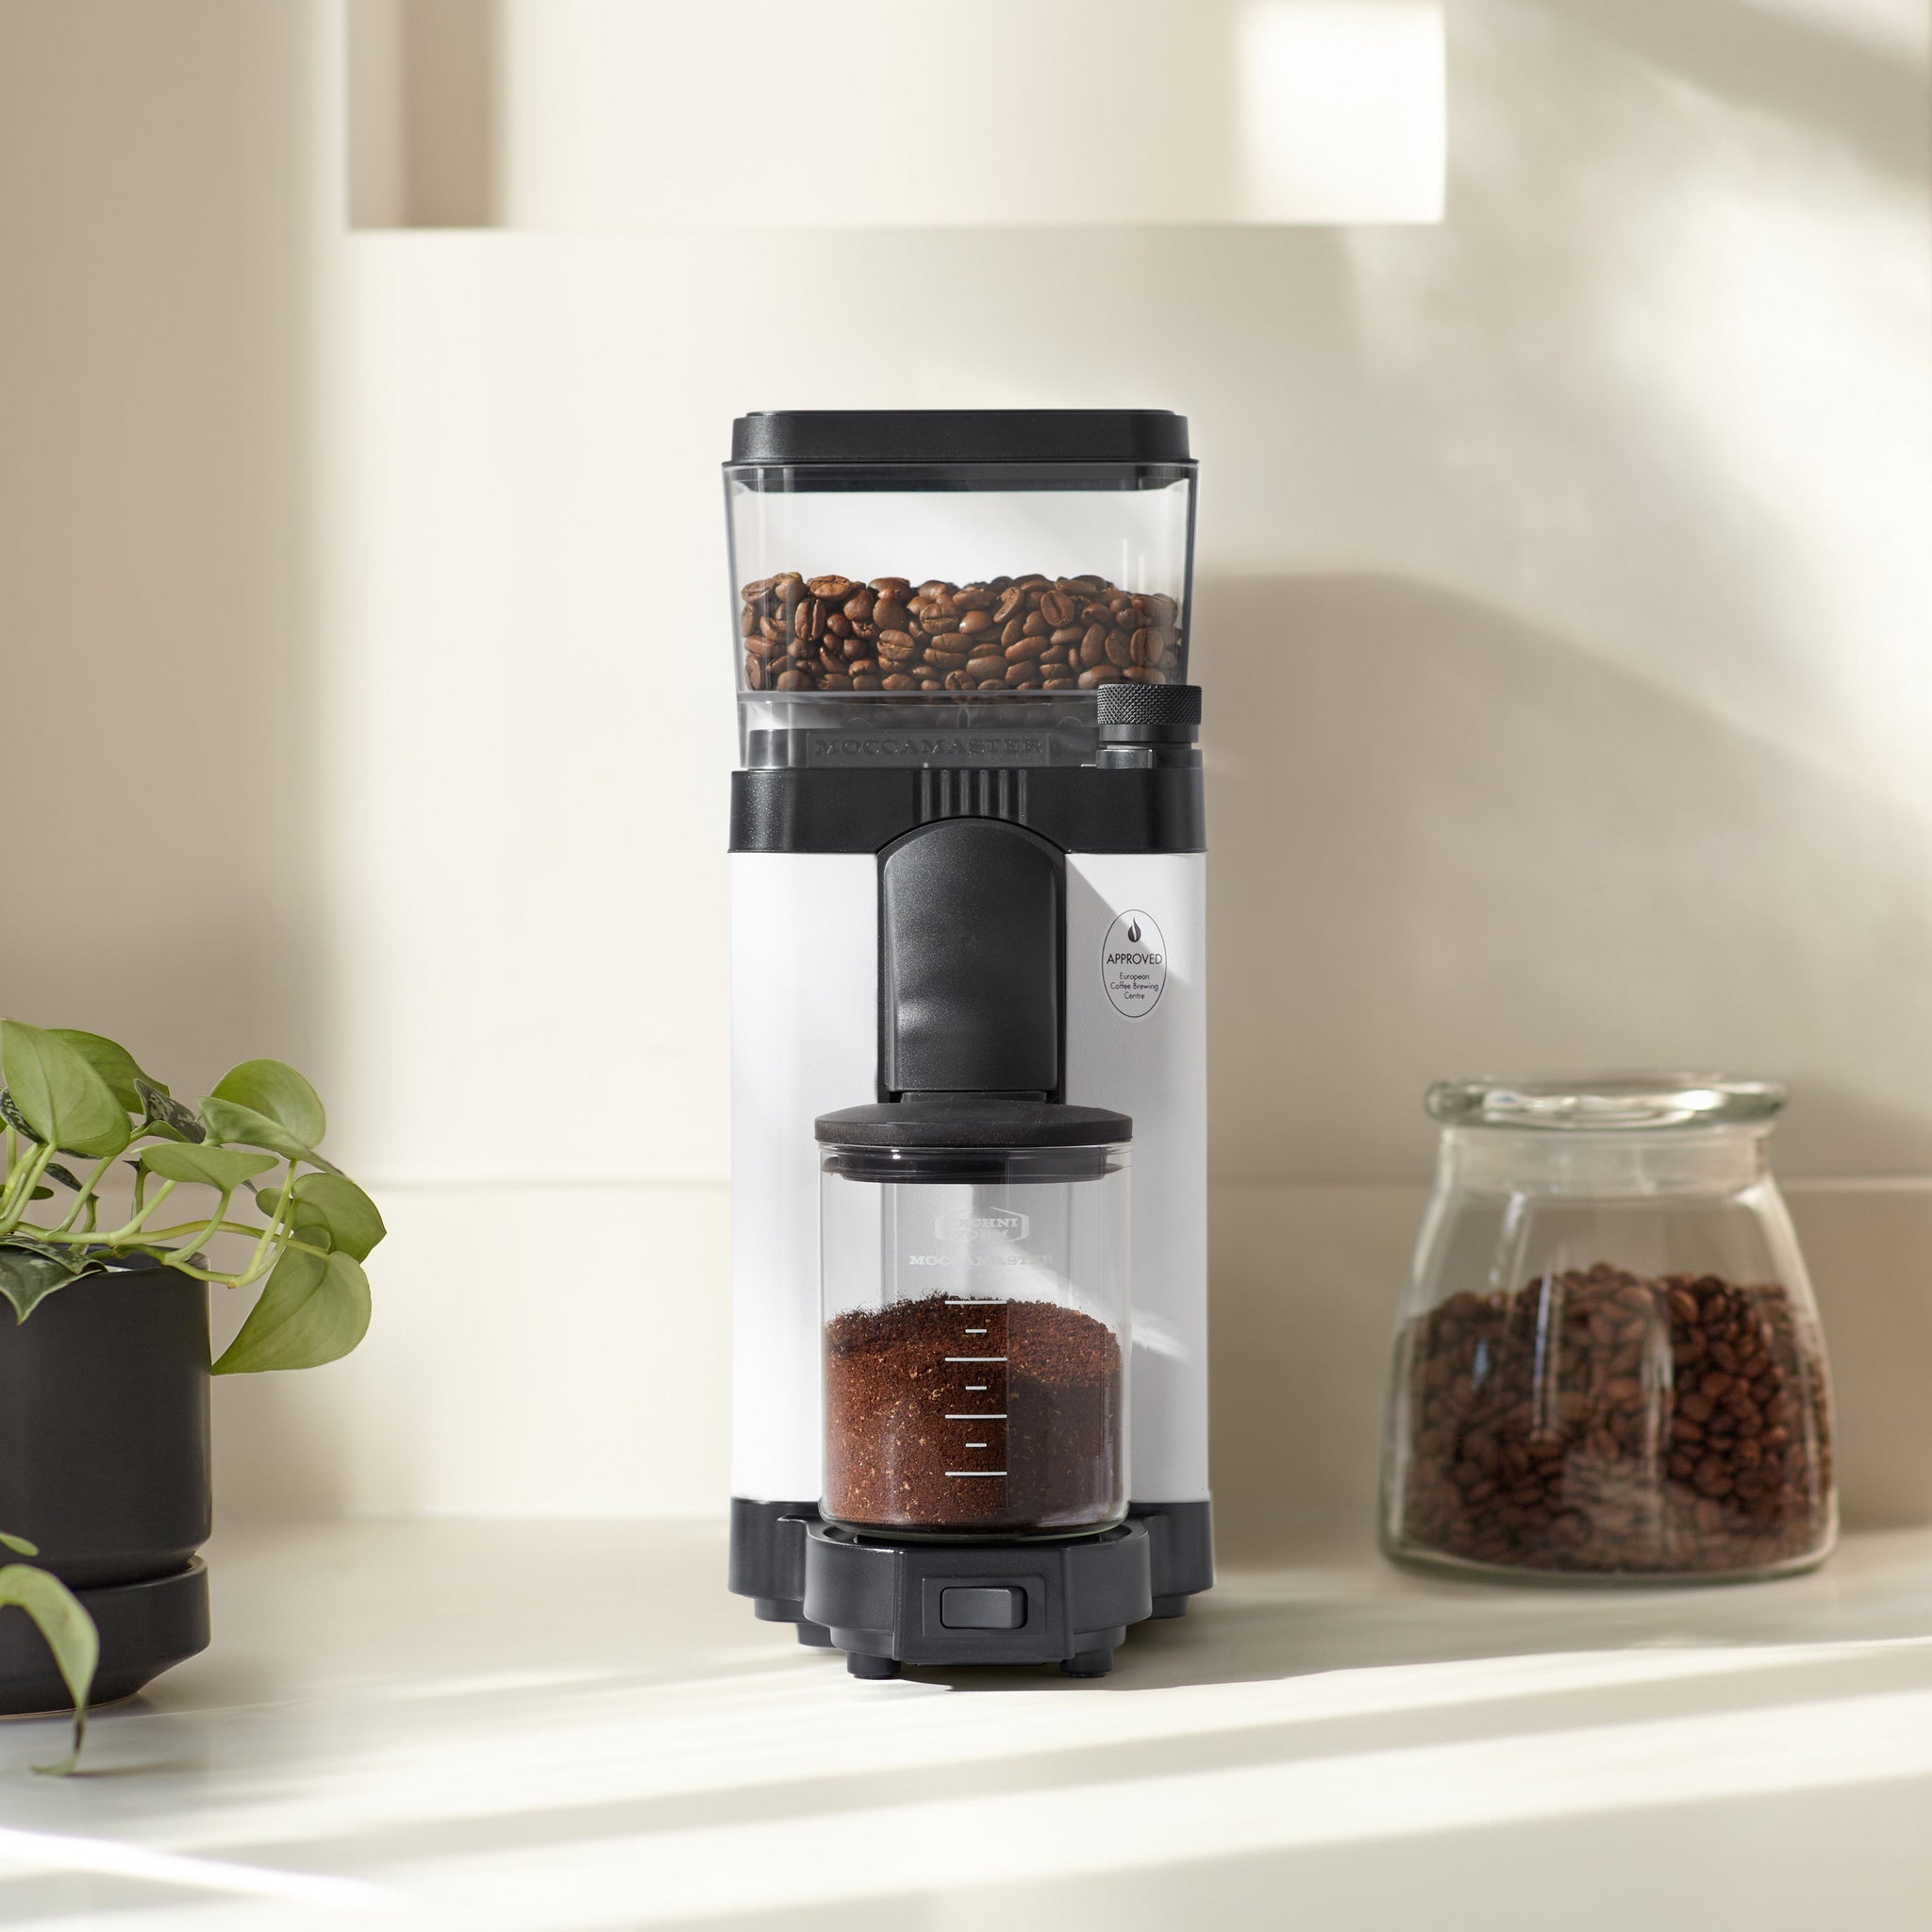 The Moccamaster K5 Grinder is approved by ECBC – ECBC